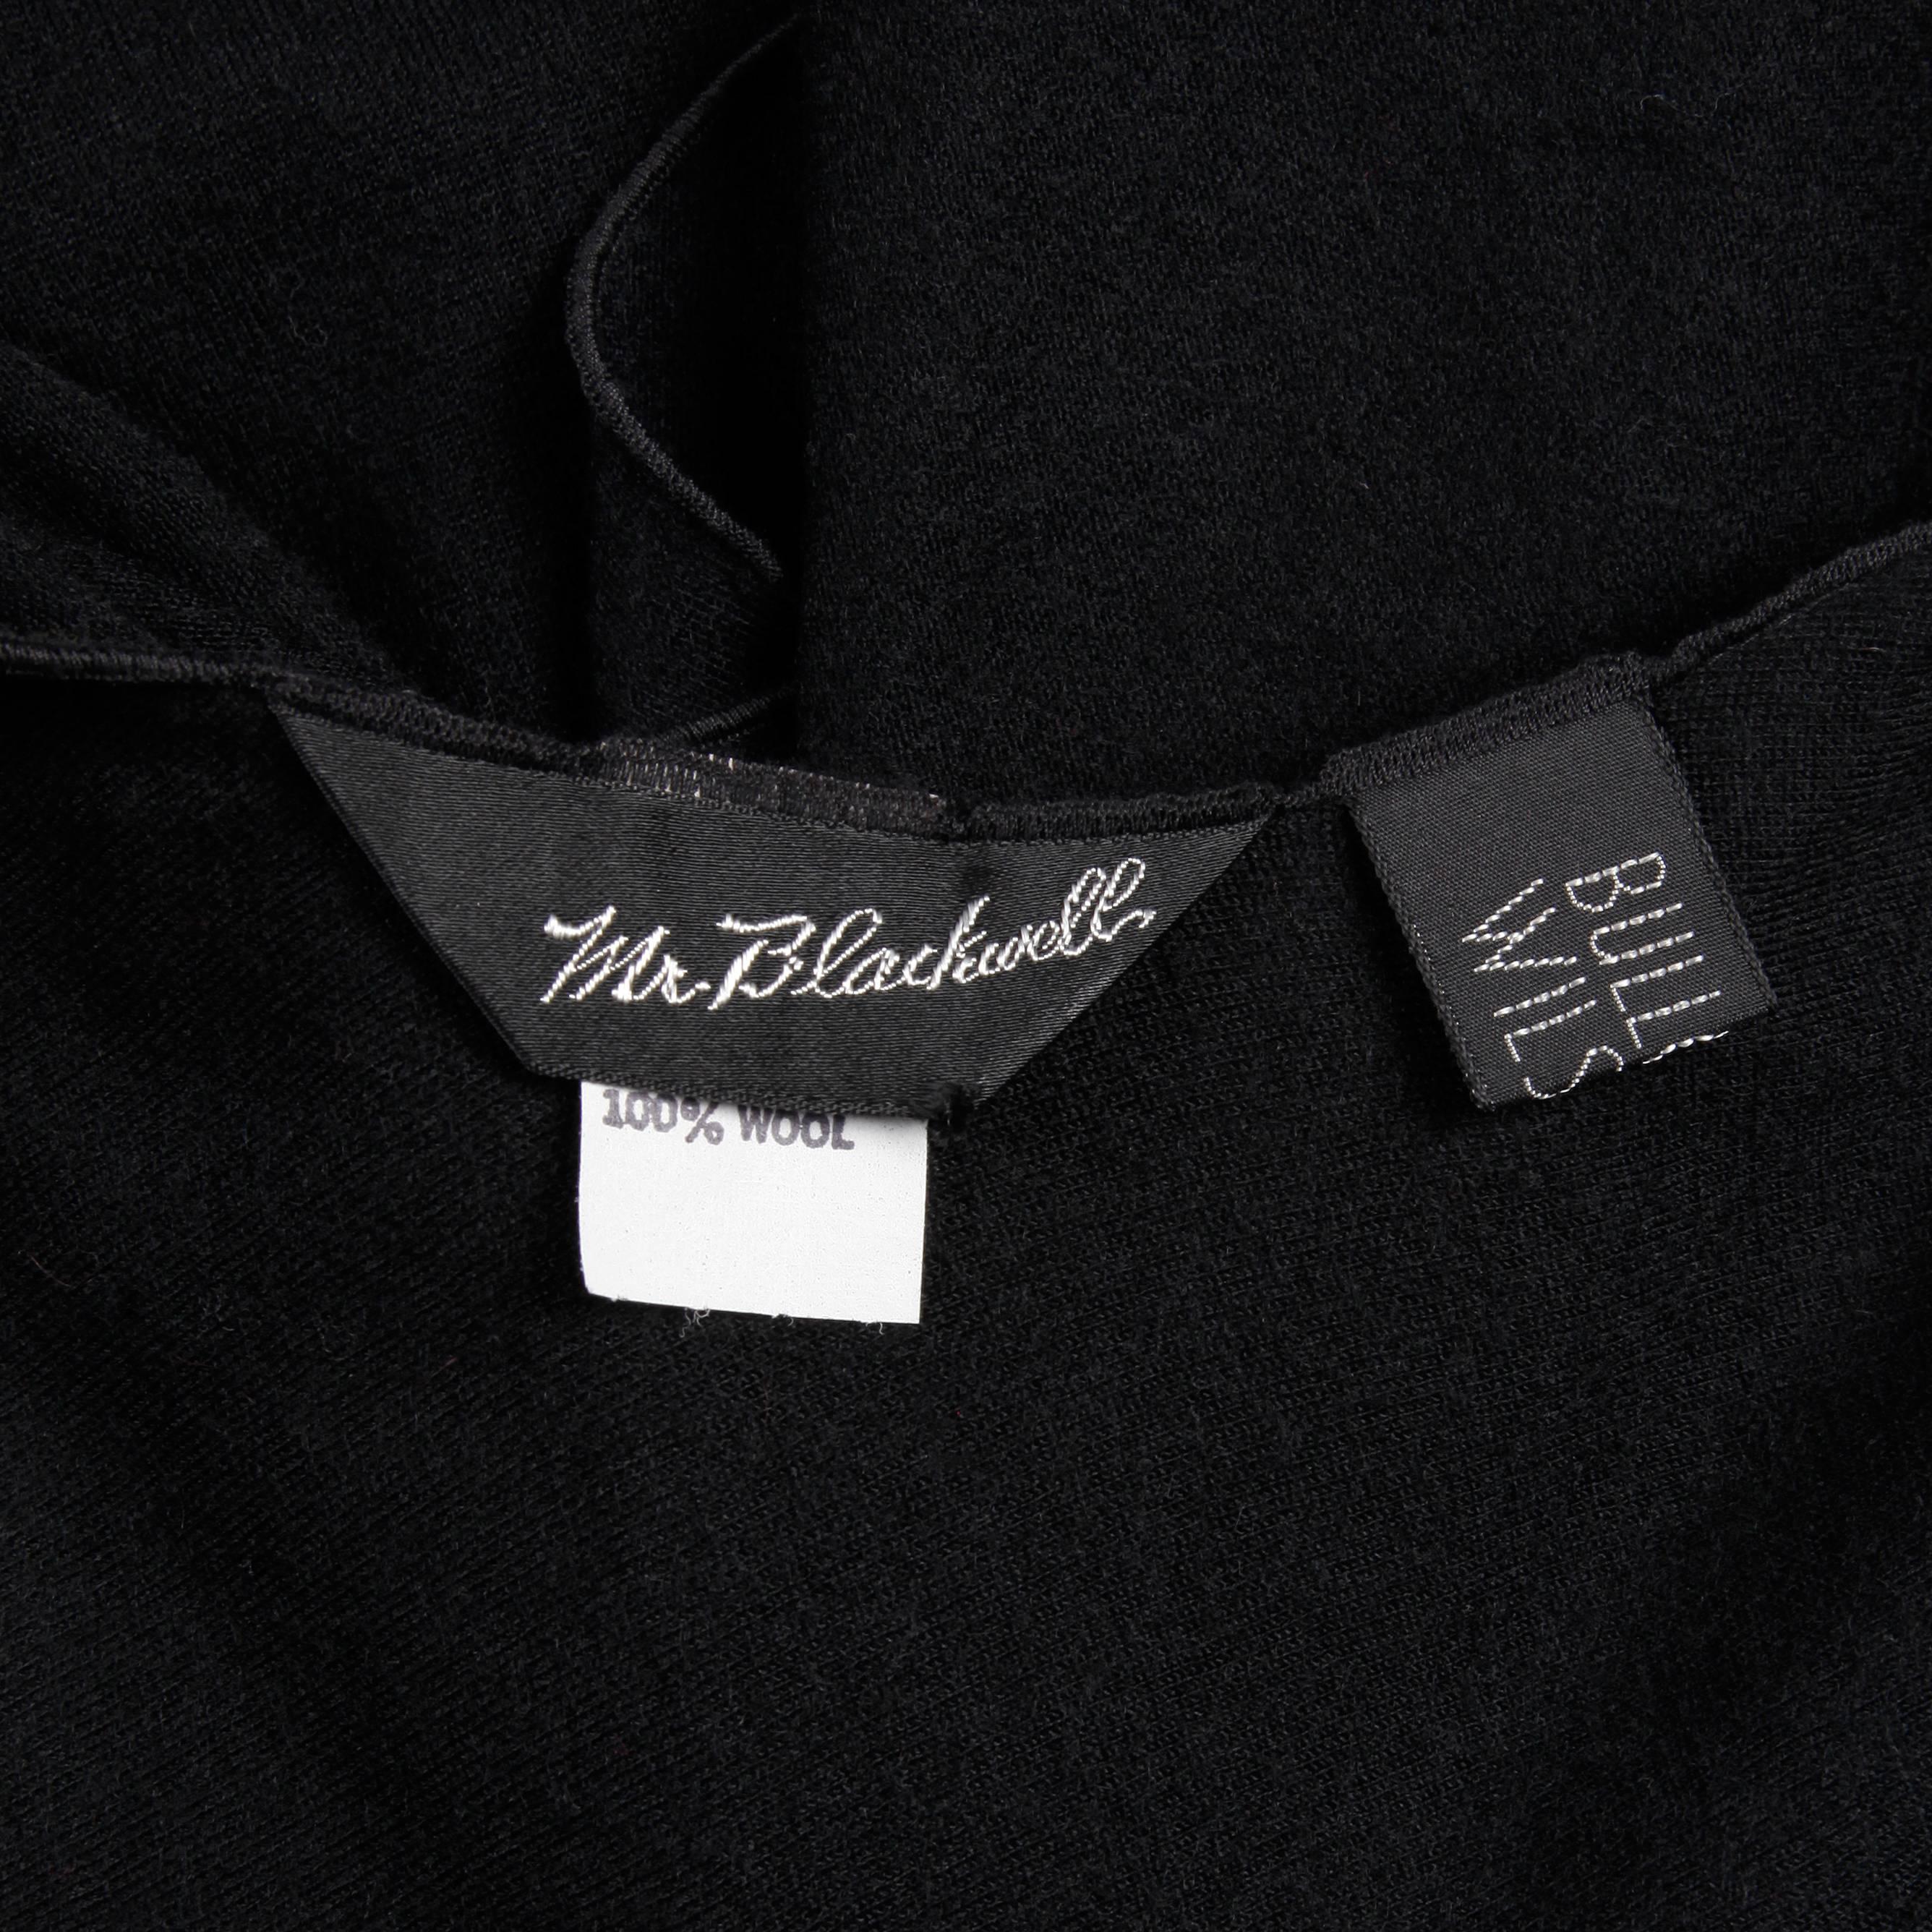 Light weight black wool wrap by Mr. Blackwell for Bullock Wilshire. Such a versatile piece! Unlined with no closure, hangs open.  100% wool. The total length is 30". Excellent vintage condition with no noted flaws. 